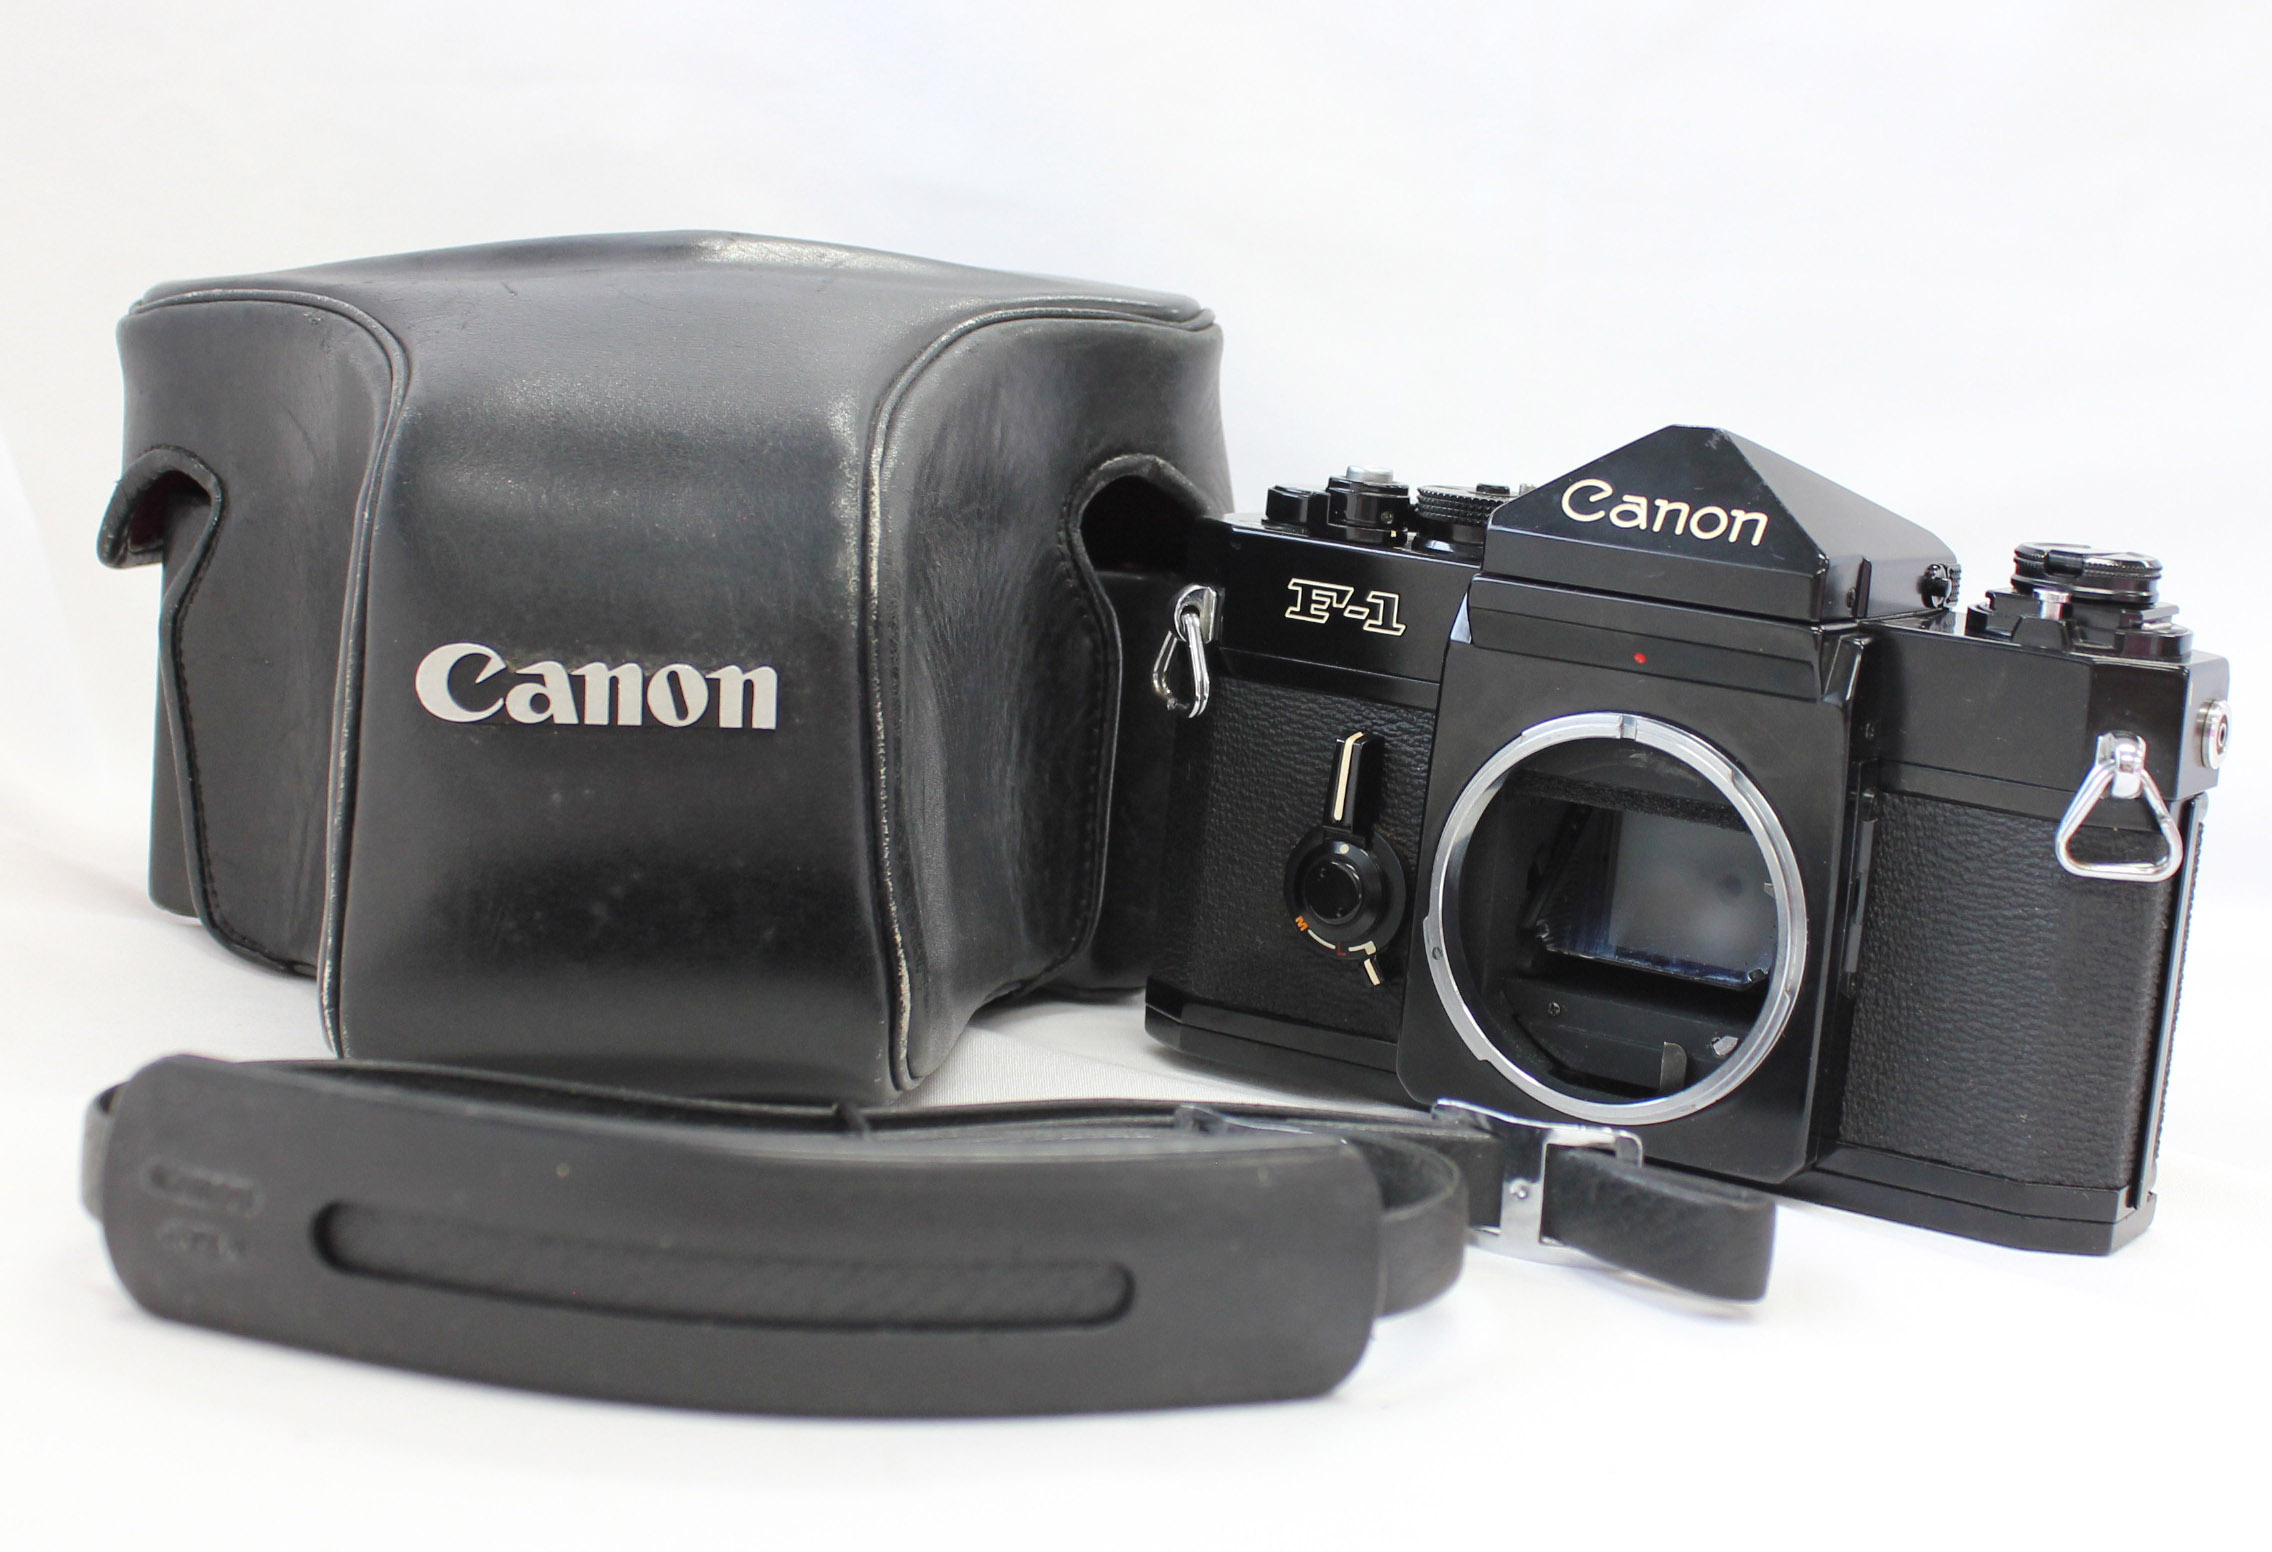 Japan Used Camera Shop | [Excellent+++] Canon F-1 35mm SLR Film Camera Body with Case and Strap from Japan